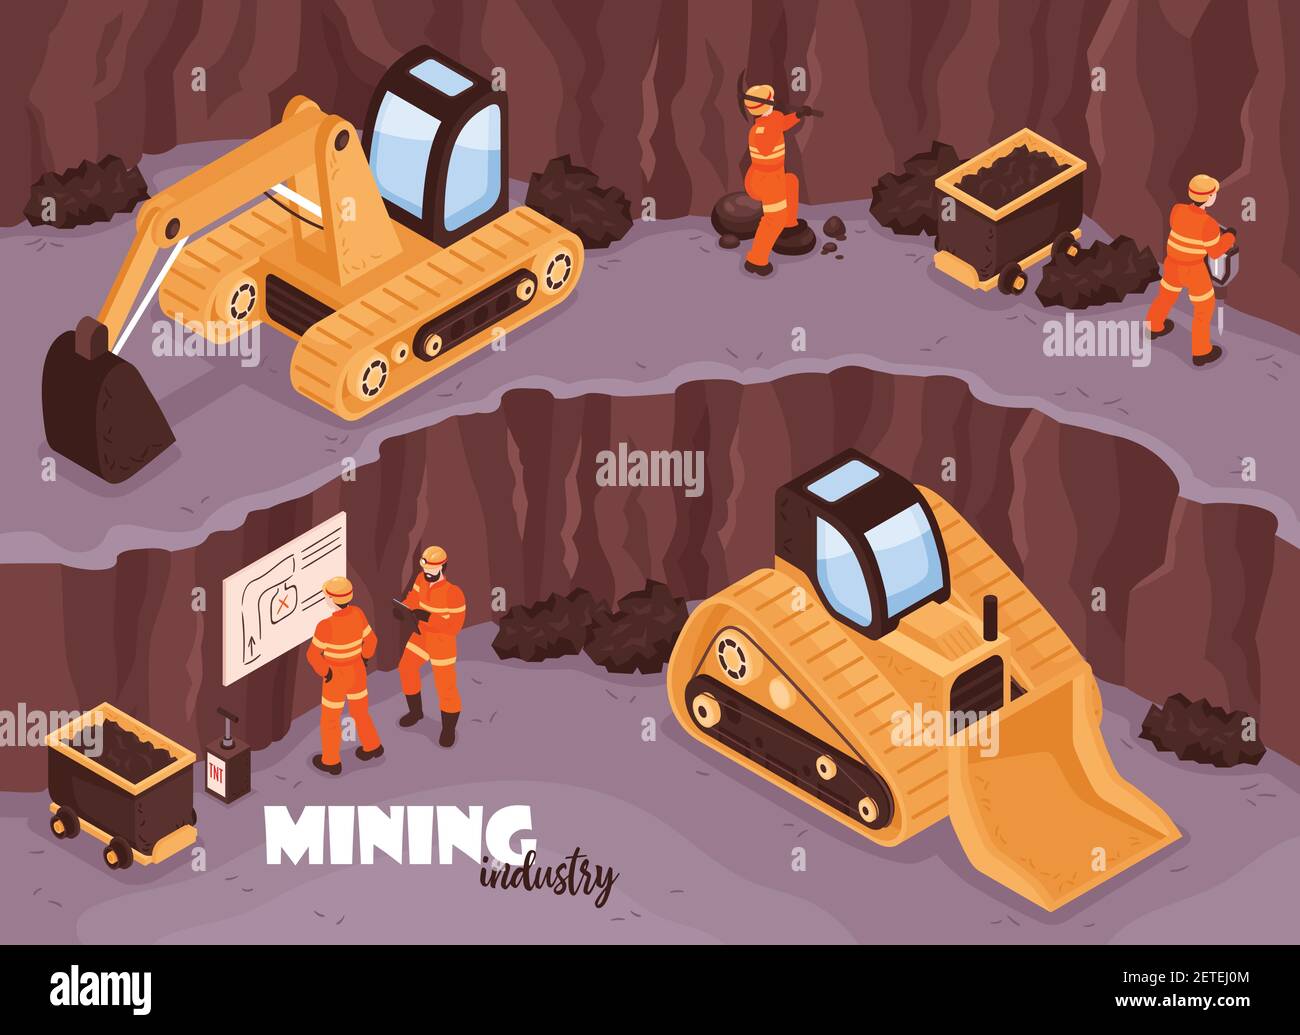 Mine industry background with characters of workers in uniform open mine scenery with excavators and text vector illustration Stock Vector